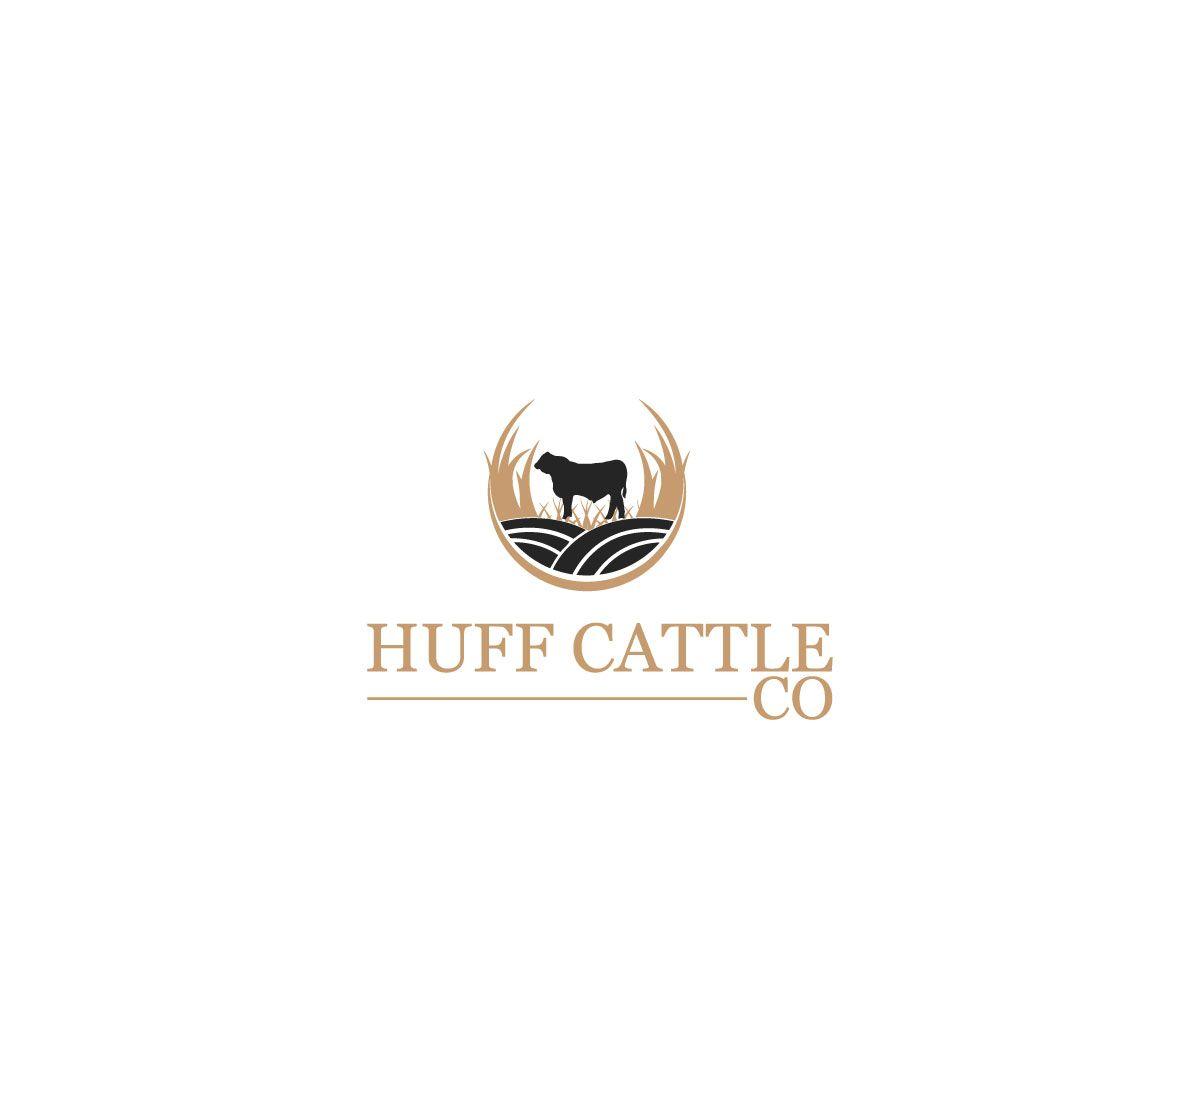 Huff Logo - Professional, Serious Logo Design for Huff Cattle Co. by ...